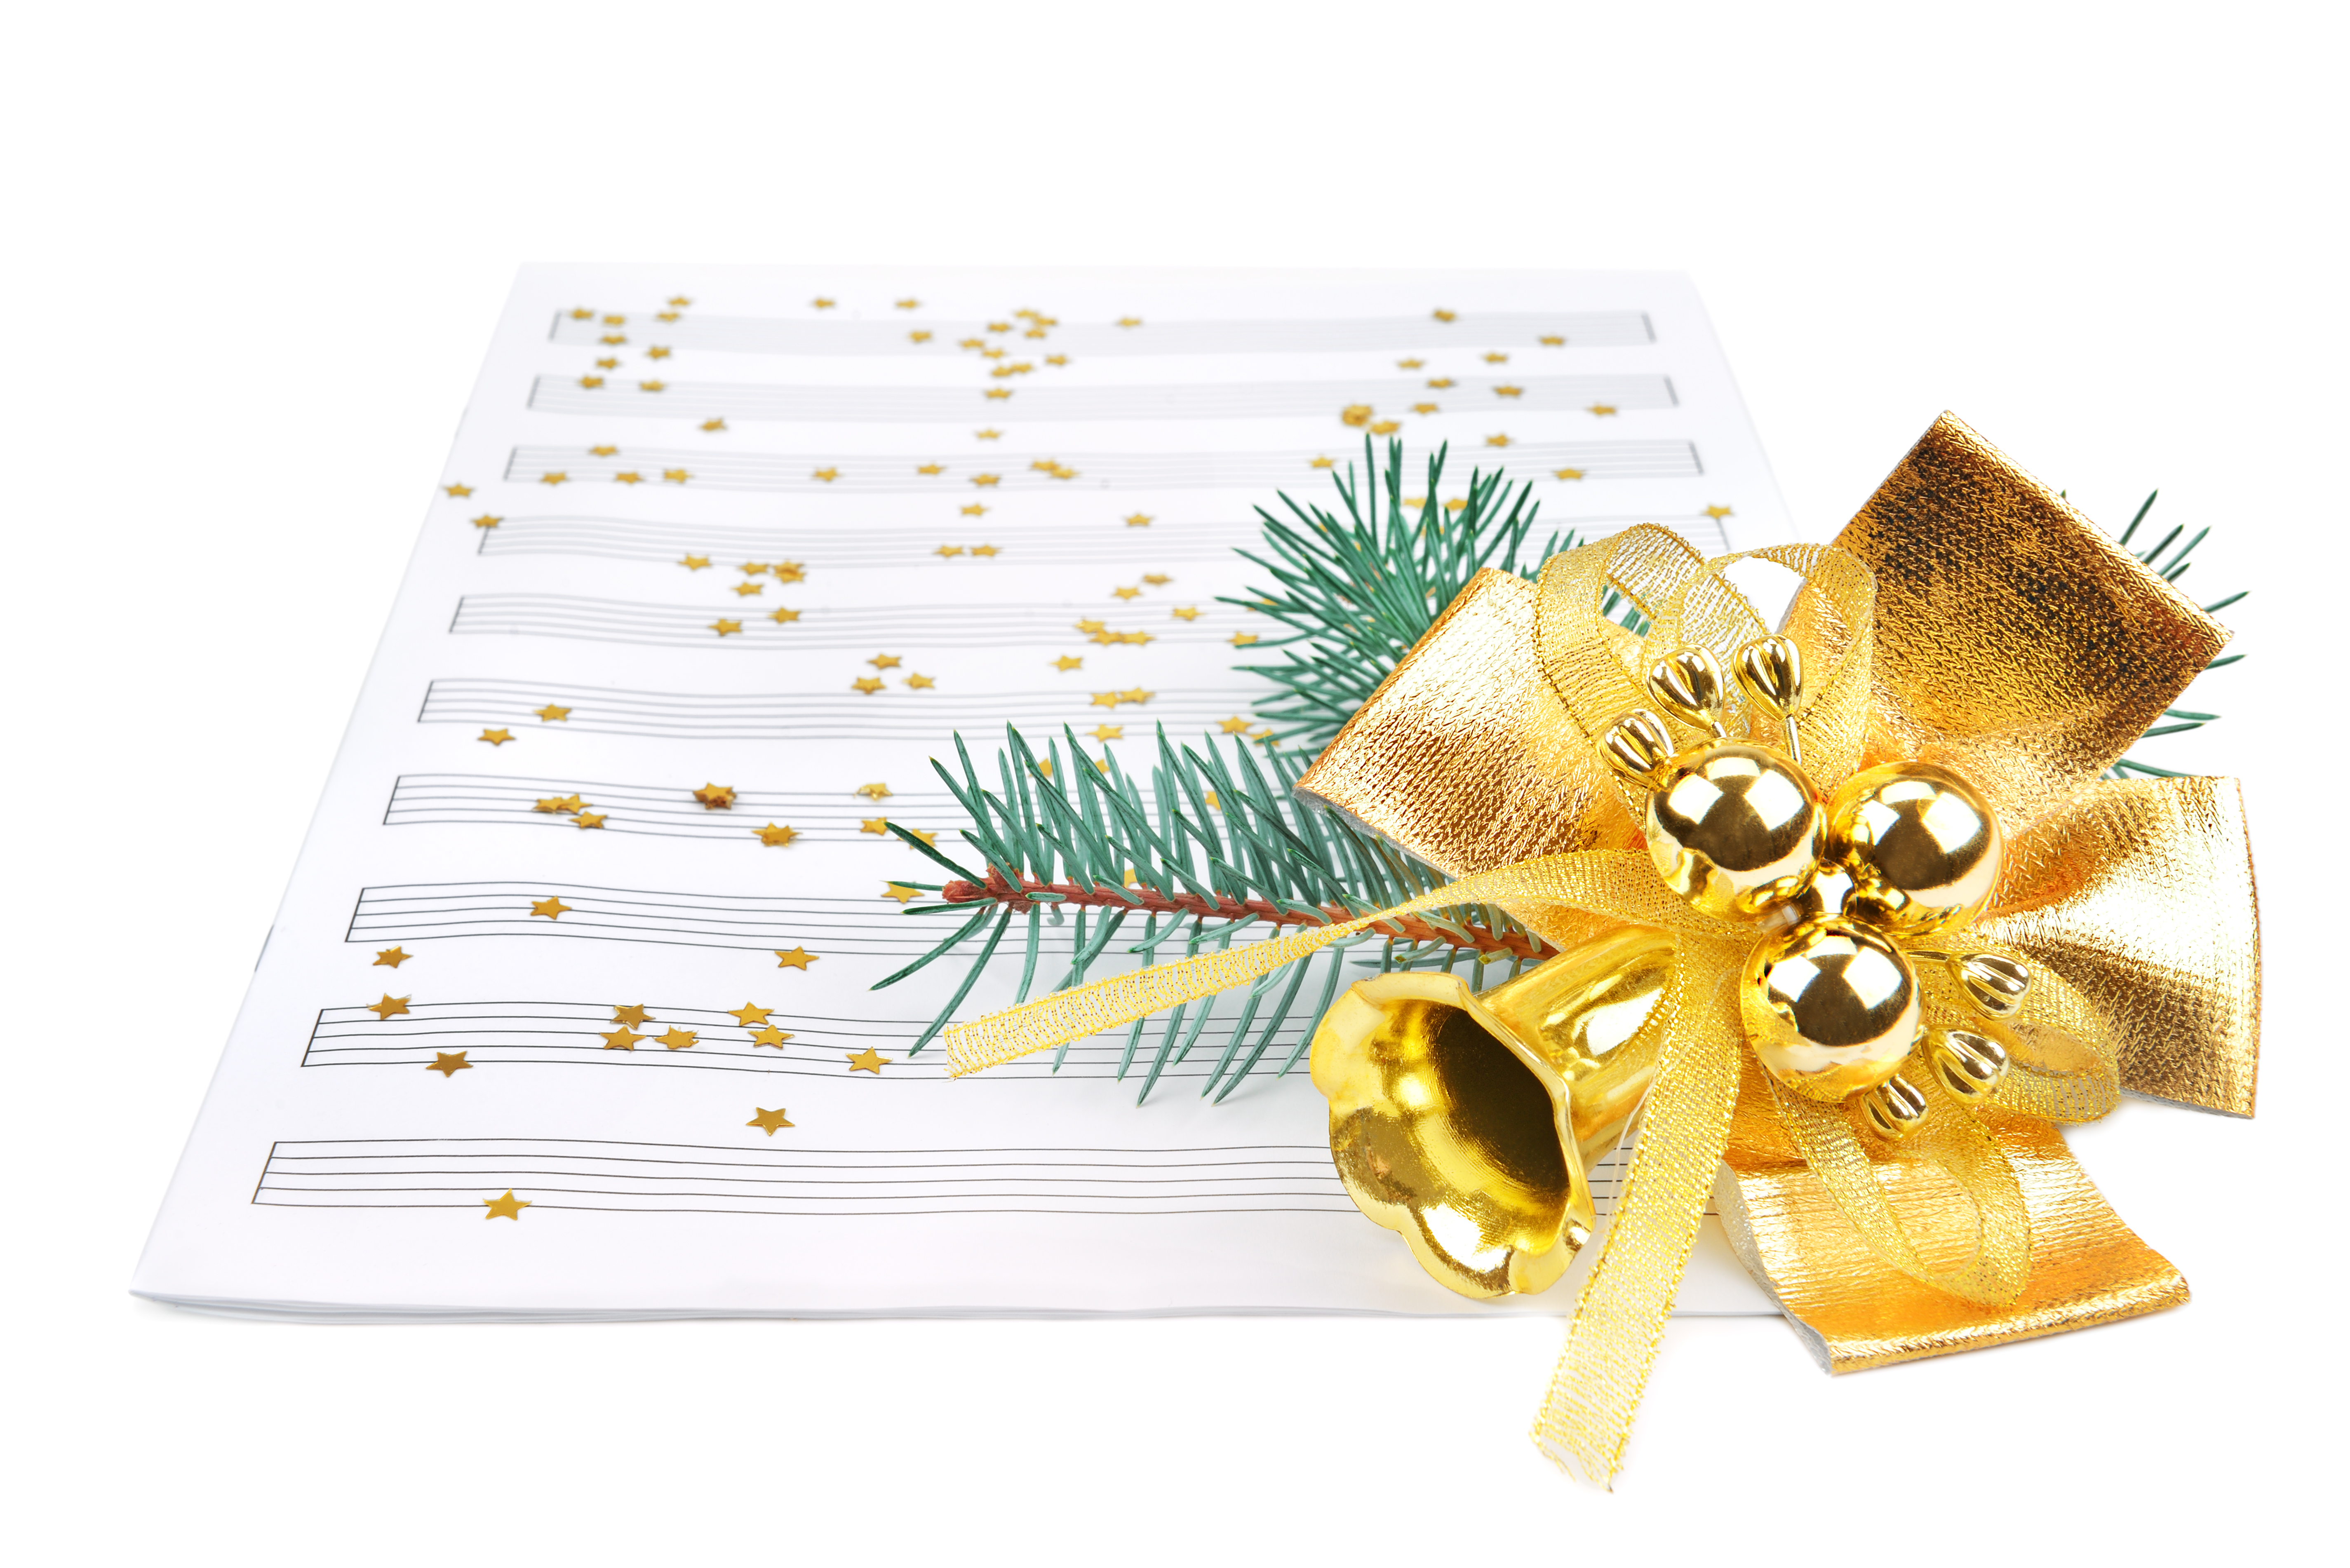 Image of sheet music with small gold stars scattered on it plus a gold bow and some greenery